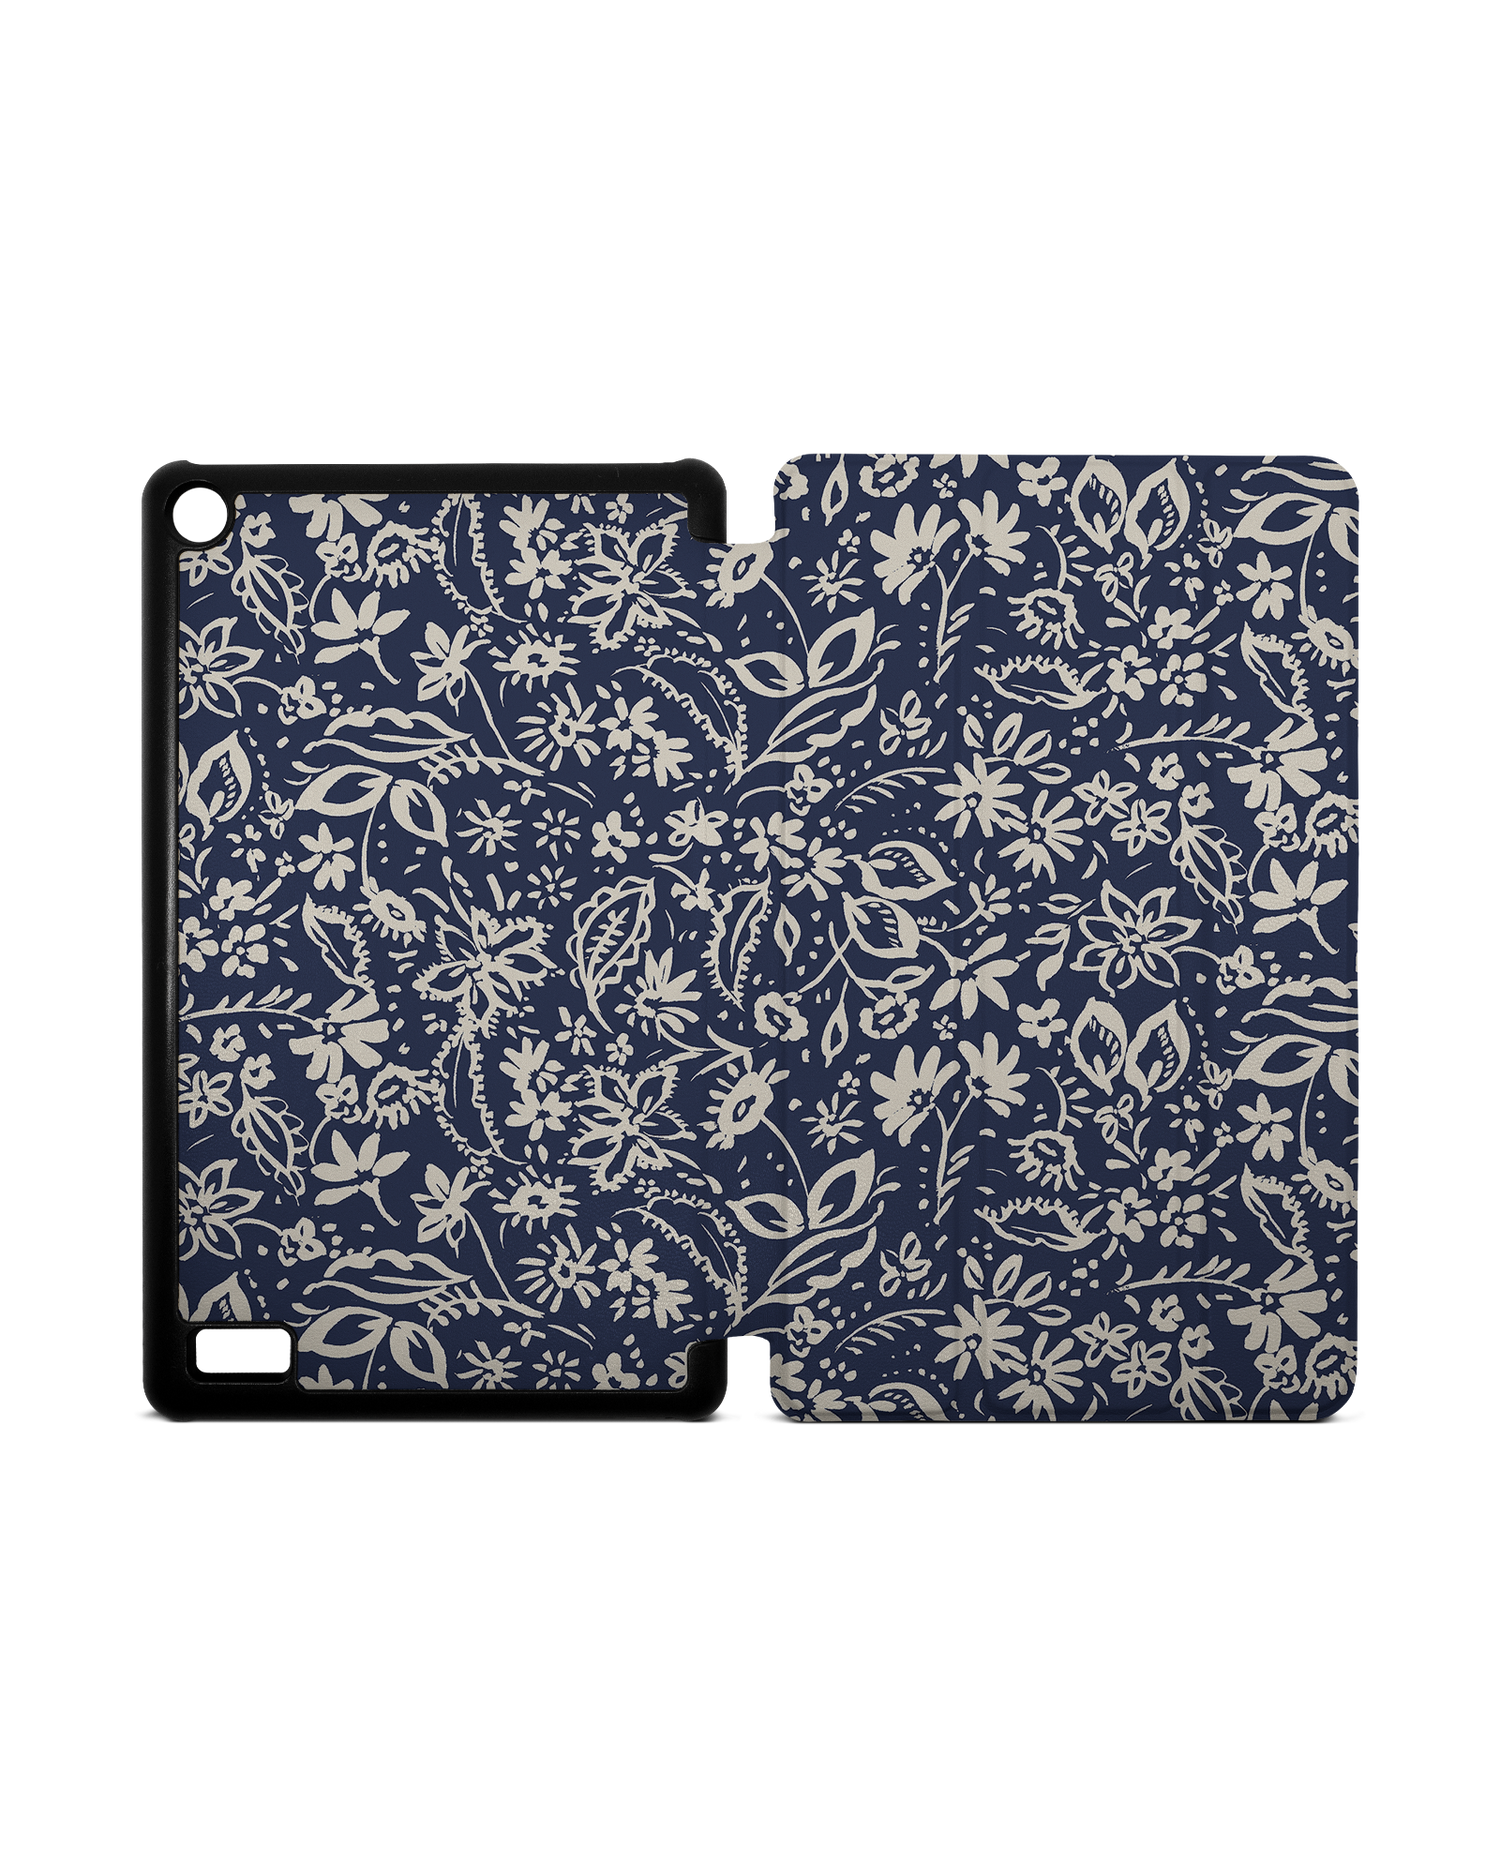 Ditsy Blue Paisley Tablet Smart Case for Amazon Fire 7: Opened